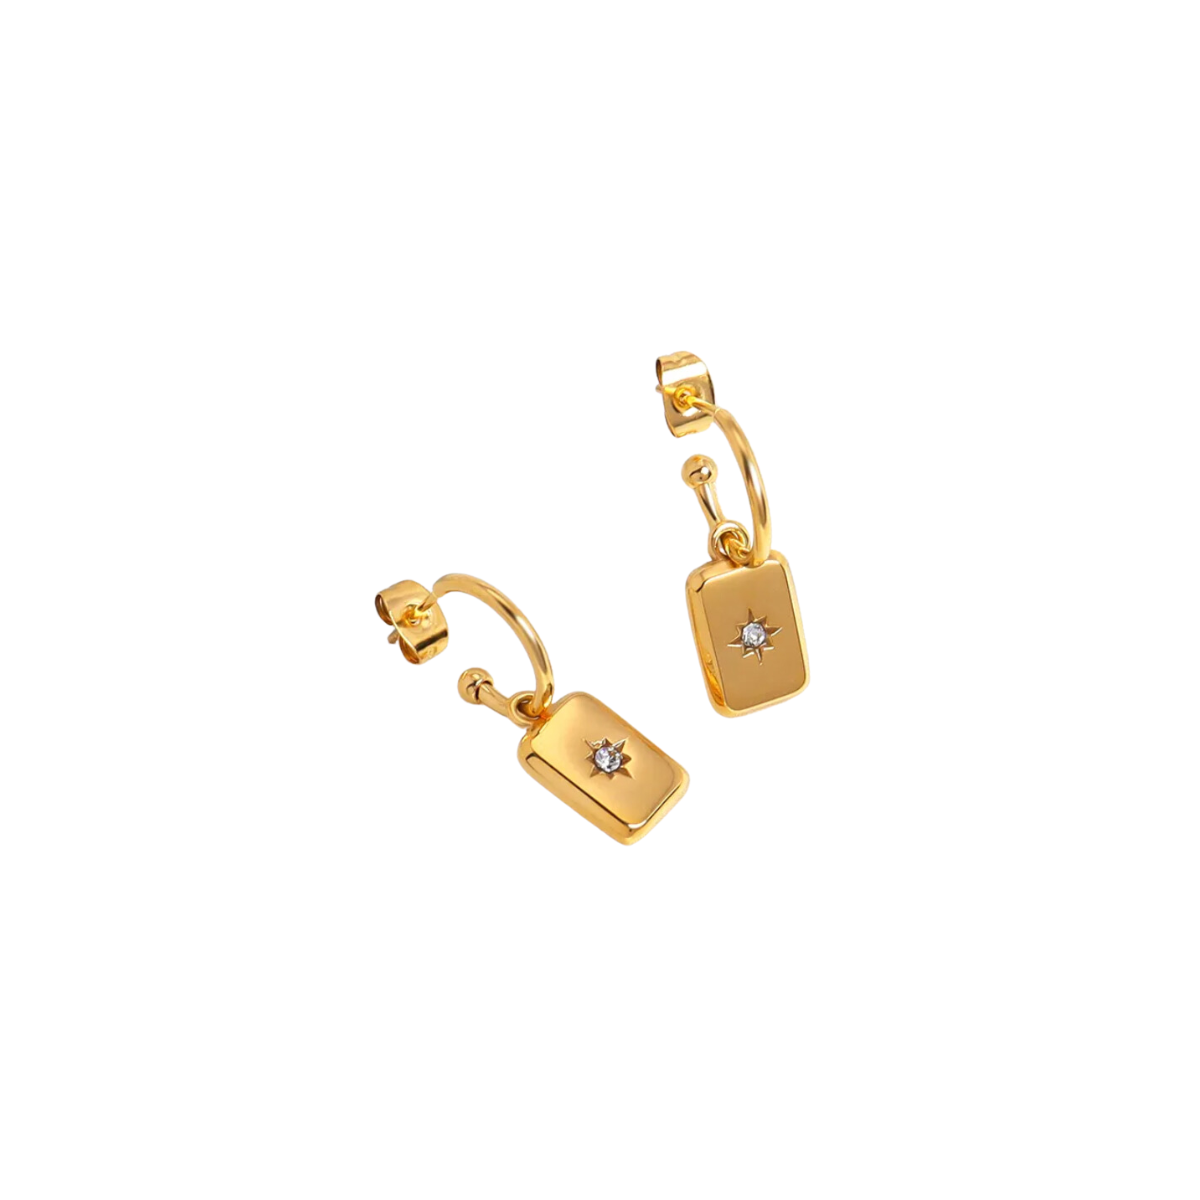 North Star 18k Gold Plated Earrings